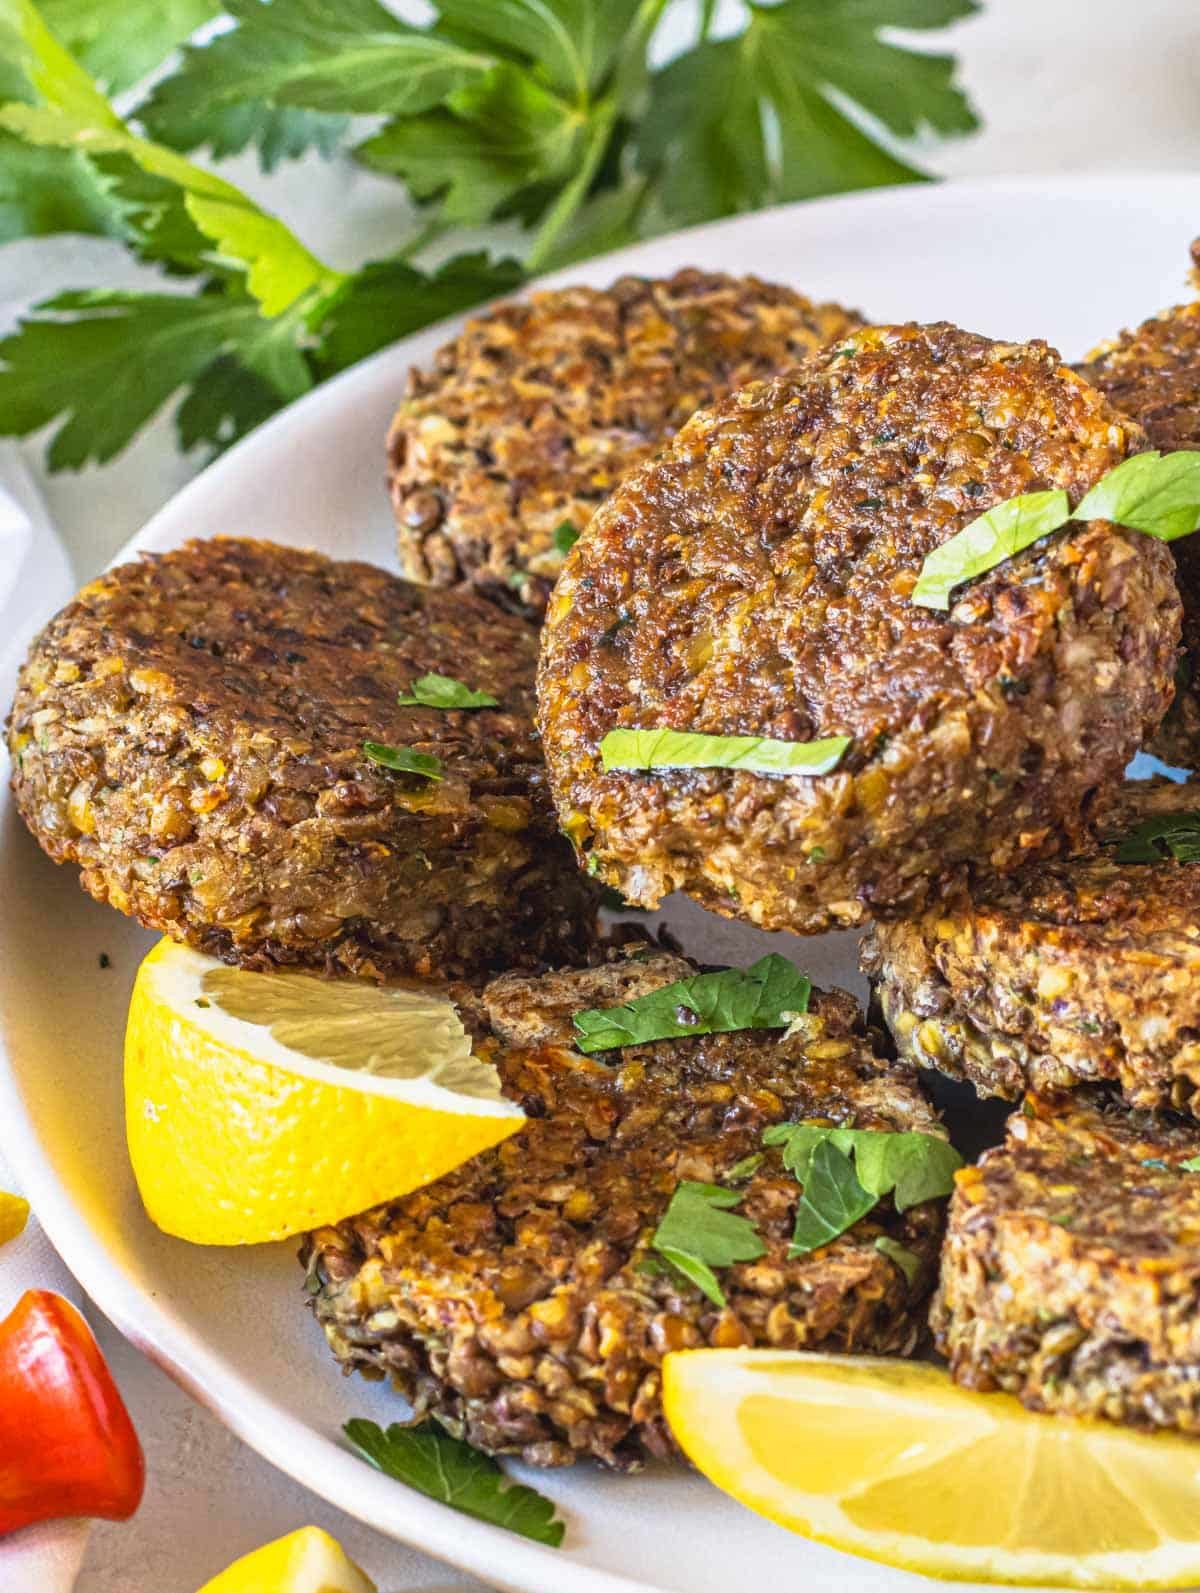 Lentil patties on a plate with parsley and lemon